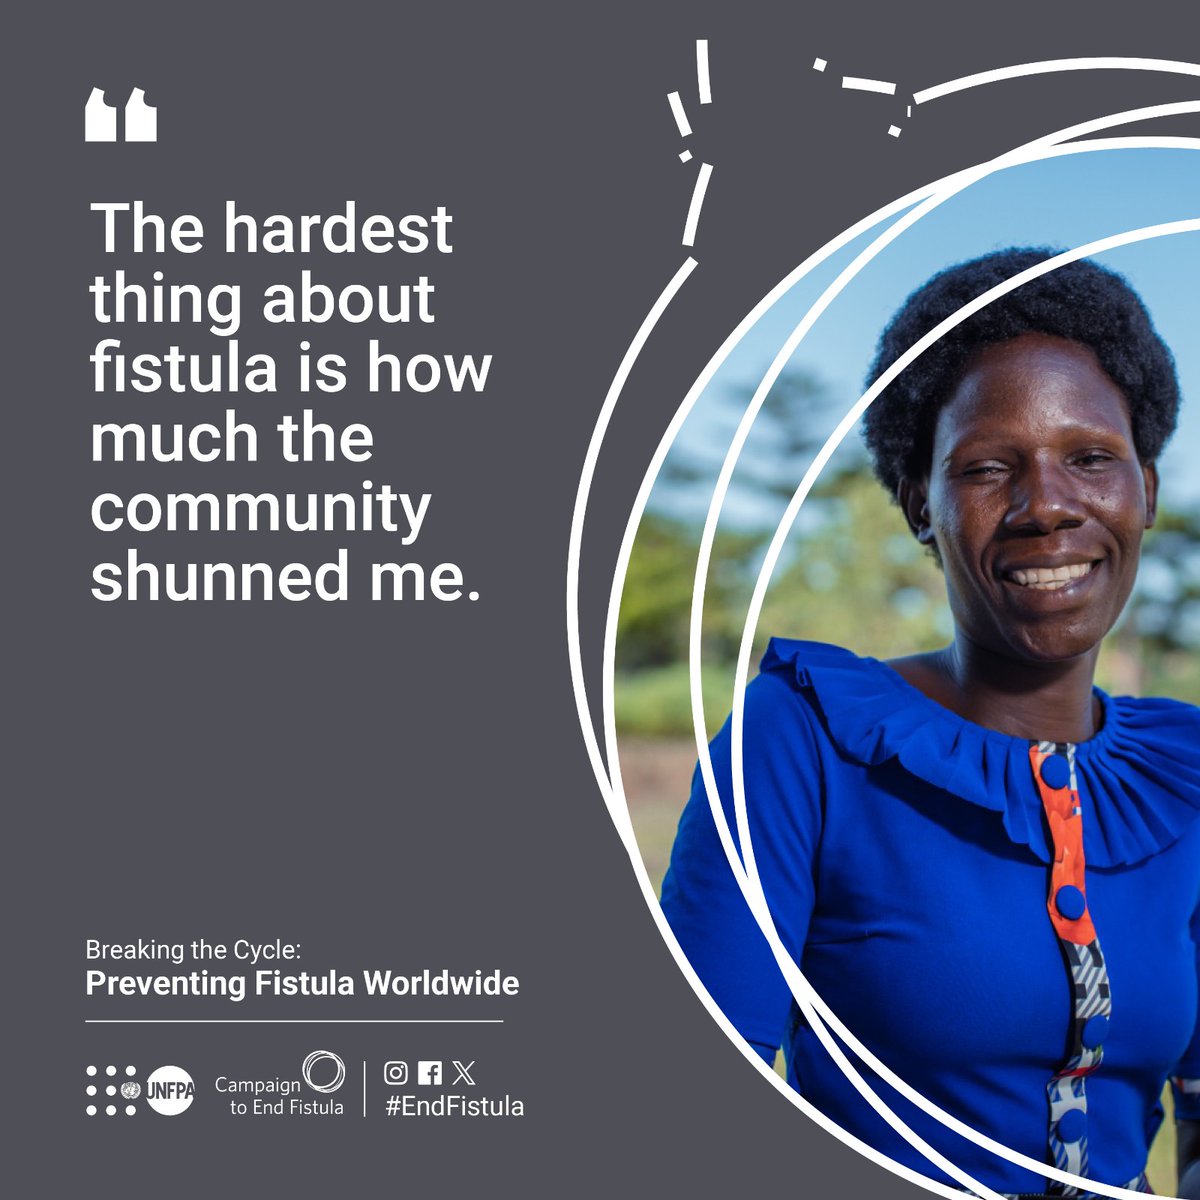 Women living with Fistula share their experiences. 
You and I have a role to play in ending stigma against this condition so as to create a strong supportive community, and safety net is very crucial.

#EndFistula